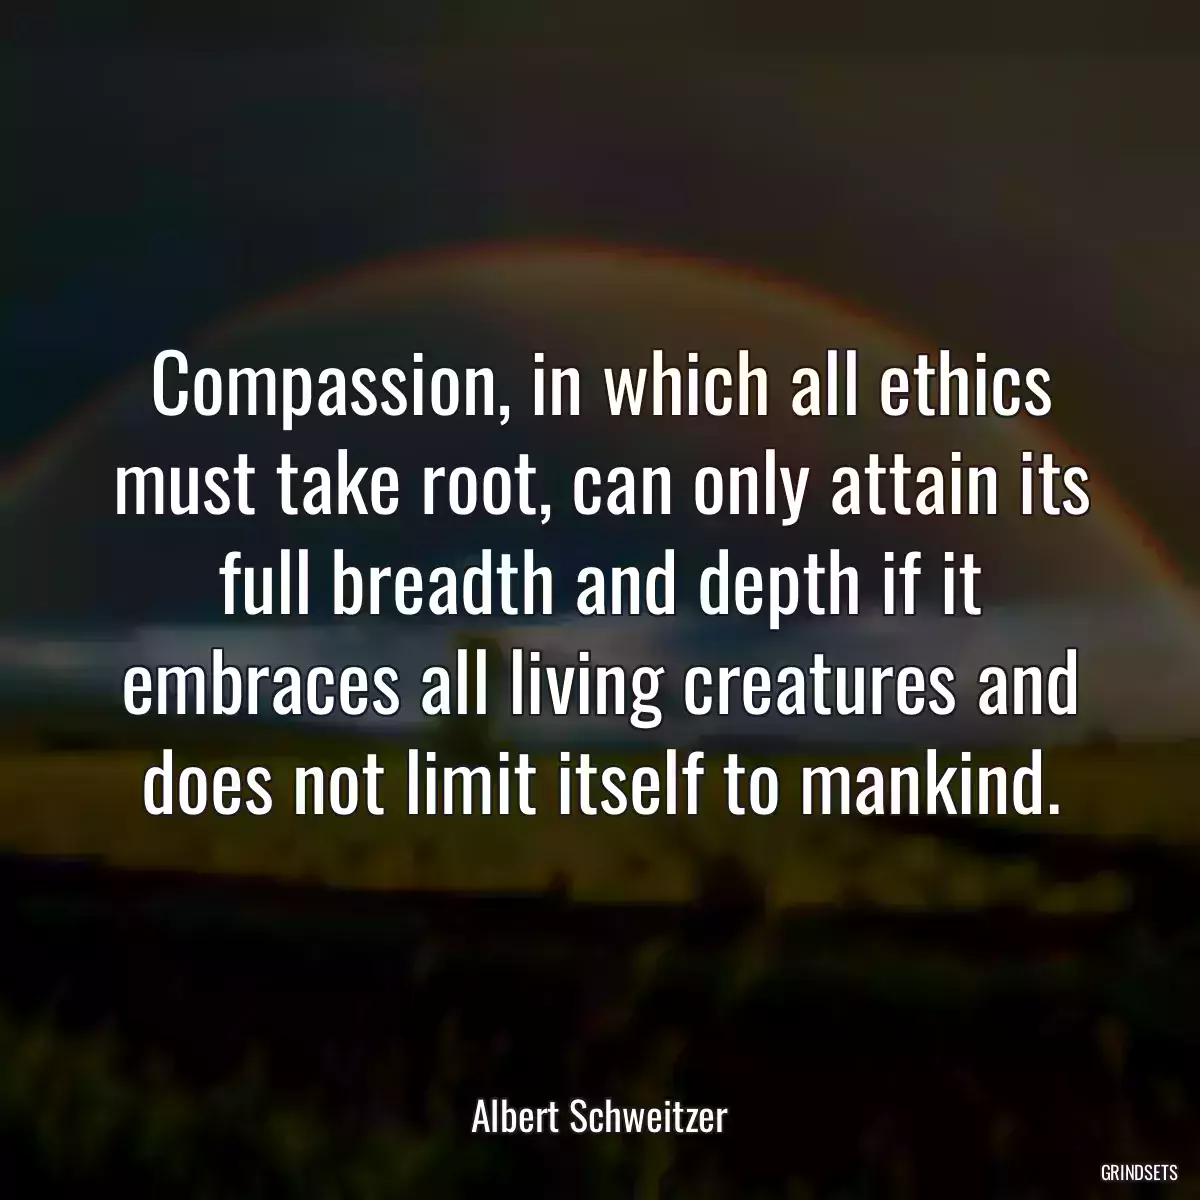 Compassion, in which all ethics must take root, can only attain its full breadth and depth if it embraces all living creatures and does not limit itself to mankind.